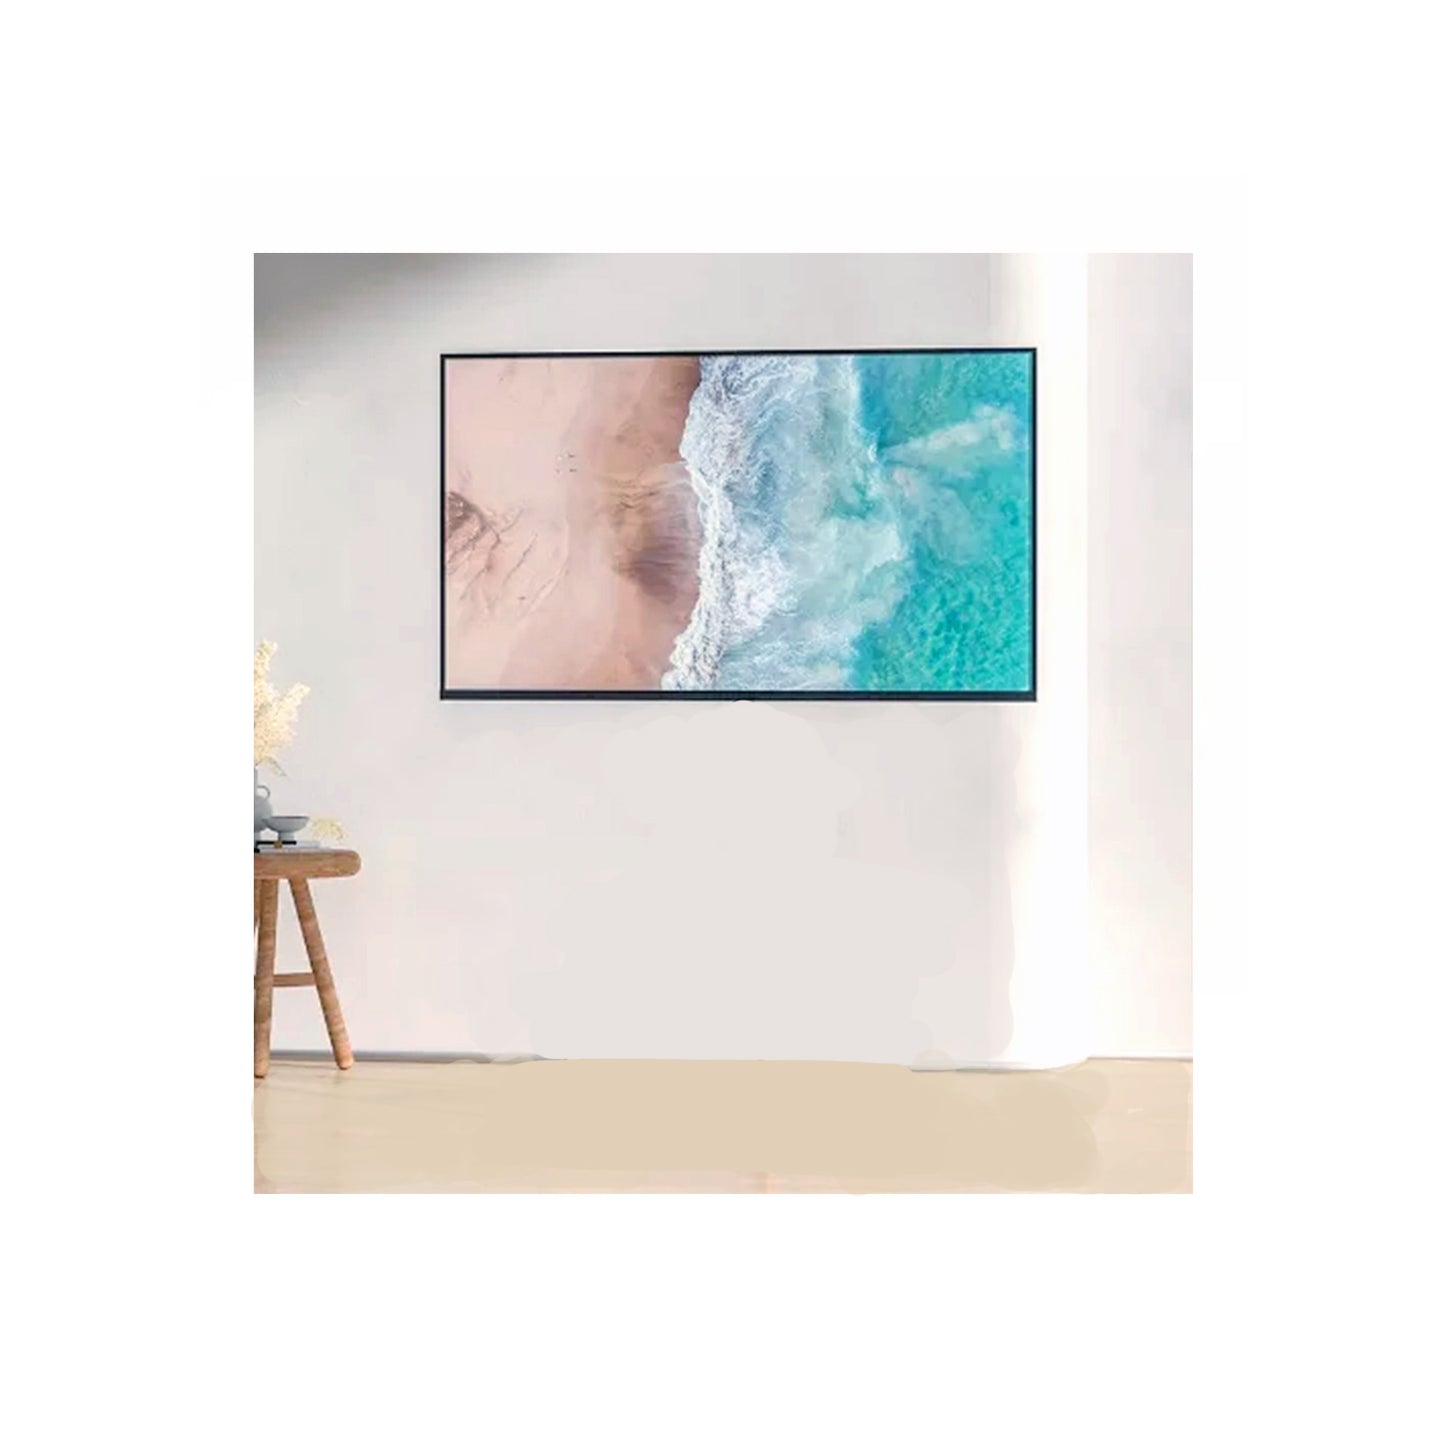 55" Indoor HD Full Colour COB All-in-one LED Dispaly